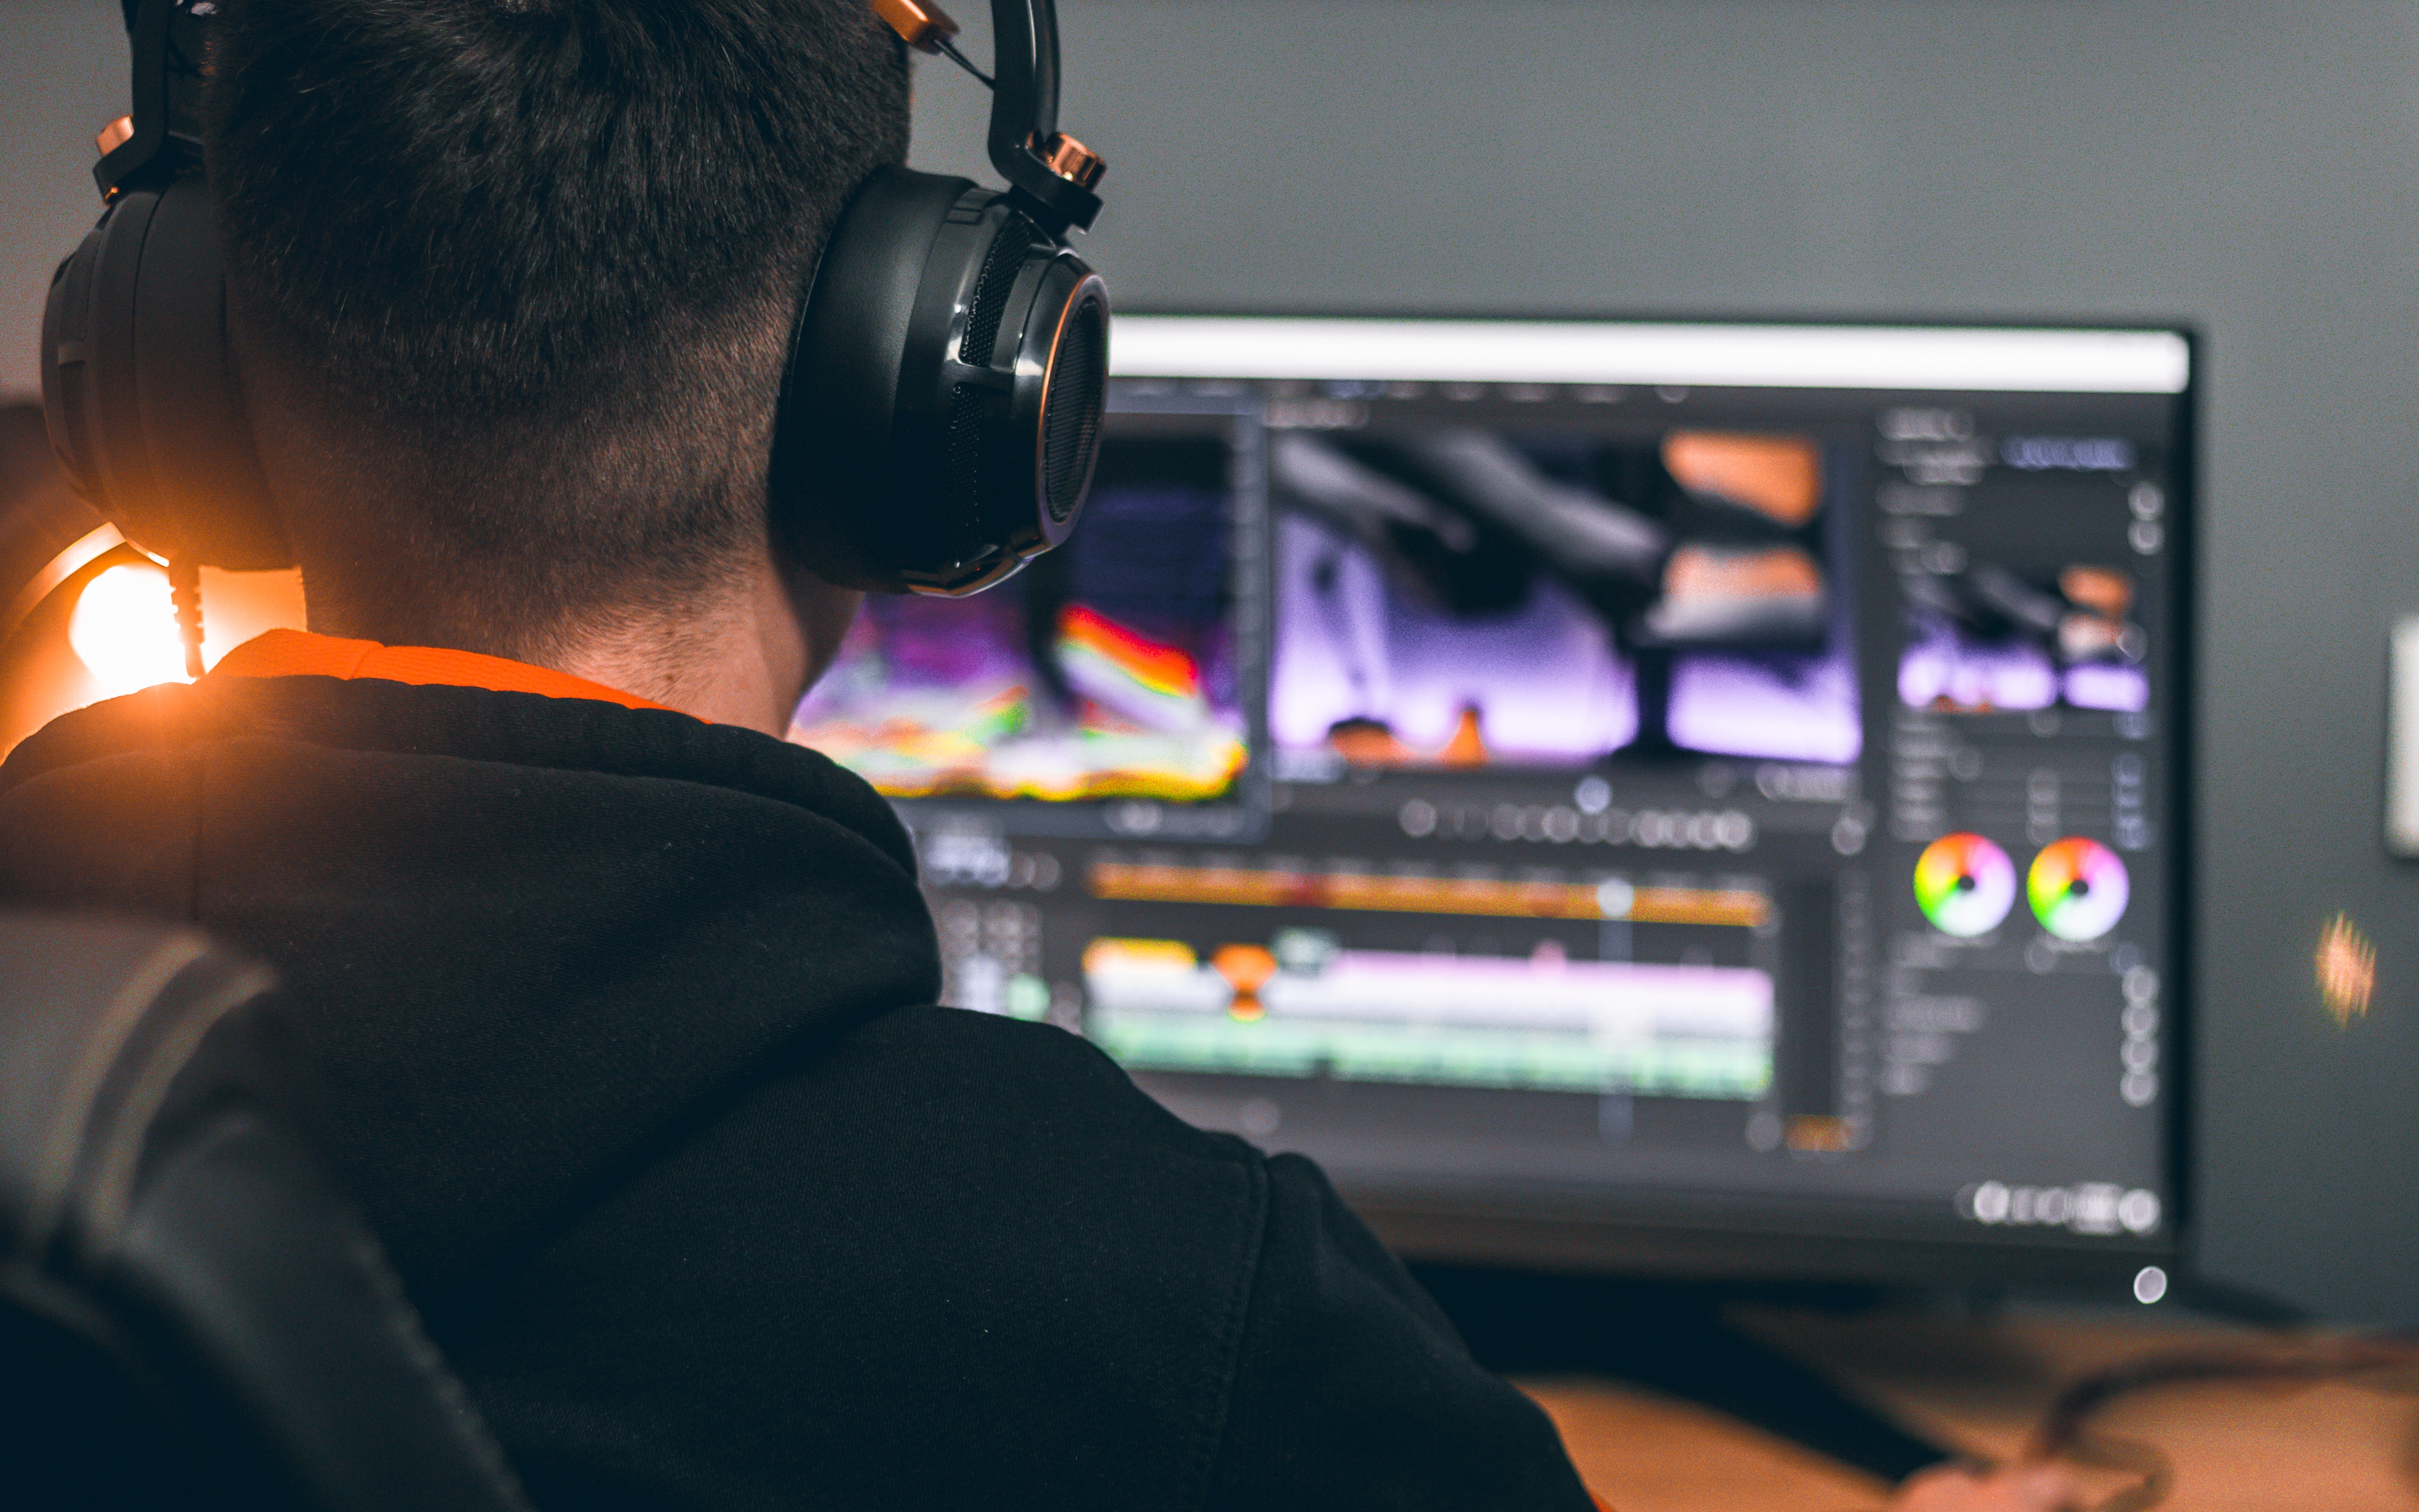 how-to-get-adobe-premiere-pro-for-free-trustedbay